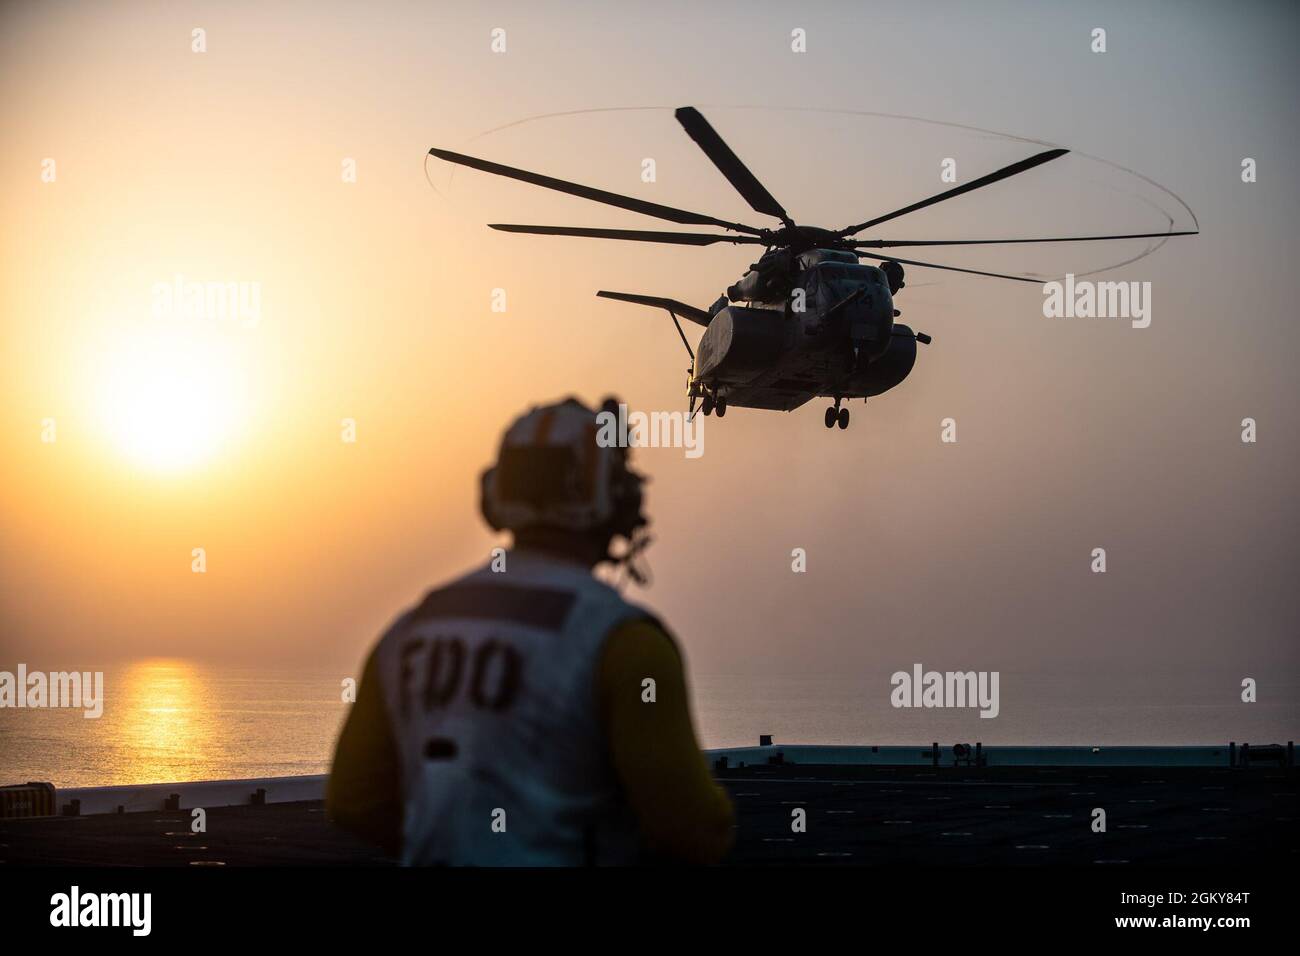 210726-N-N0146-1191 ARABIAN GULF (July 26, 2021) – Aviation Boatswain’s Mate (Handling) 1st Class Roy Brown assigned to expeditionary sea base USS Lewis B. Puller (ESB 3) observes an MH-53E Sea Dragon helicopter attached to Helicopter Mine Countermeasures Squadron (HM) 15 land on the flight deck during flight operations in the Arabian Gulf, July 26. Lewis B. Puller is deployed to the U.S. 5th Fleet area of operations in support of naval operations to ensure maritime stability and security in the Central Region, connecting the Mediterranean and Pacific through the western Indian Ocean and three Stock Photo